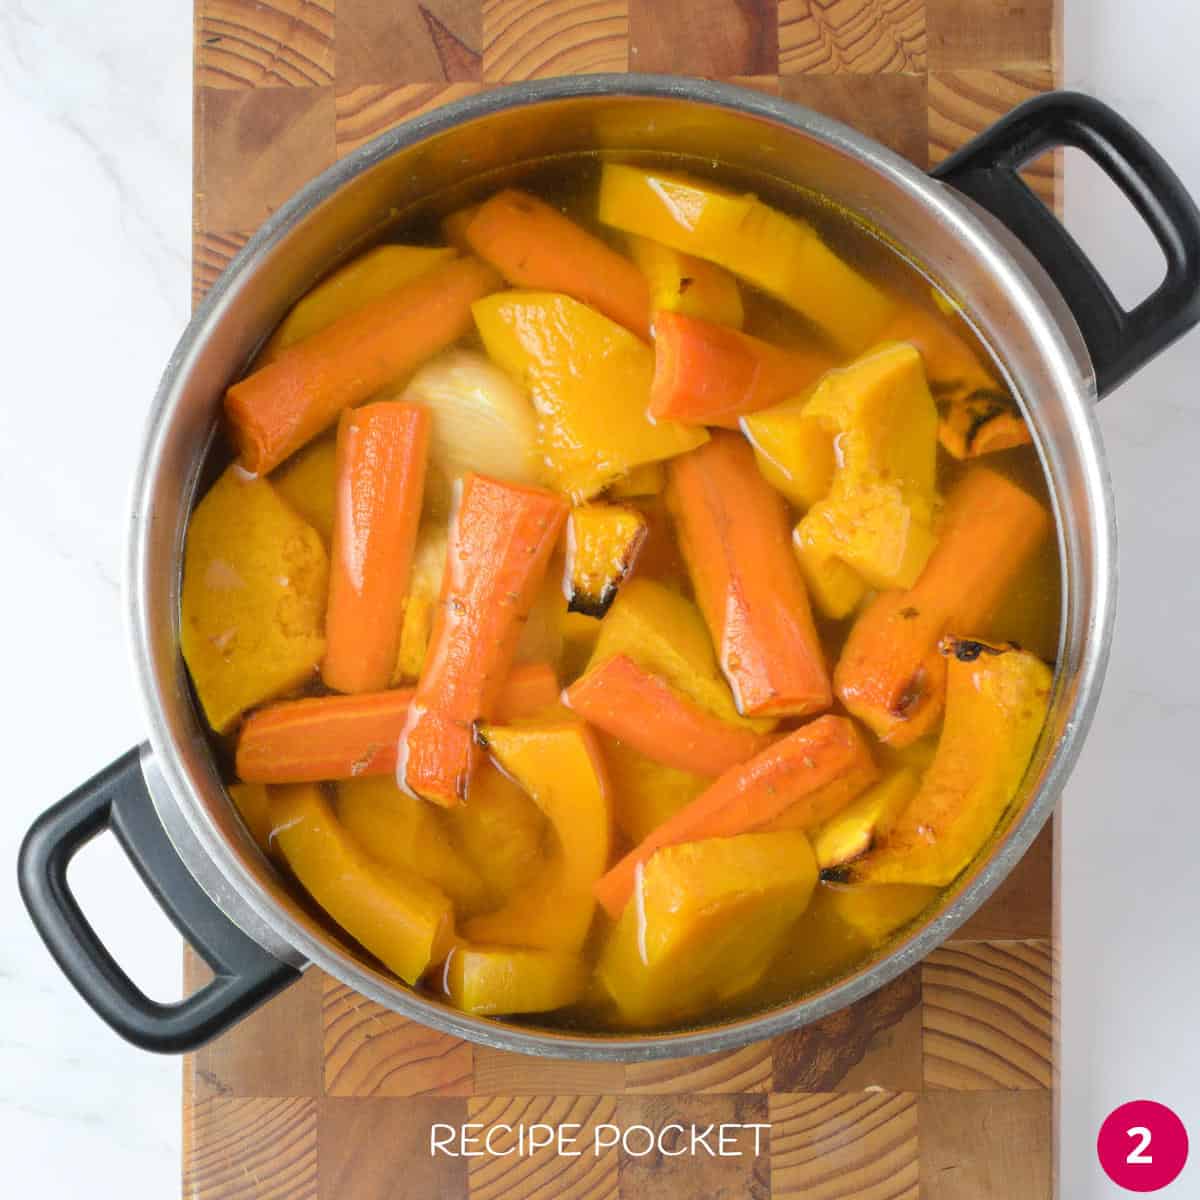 Roasted vegetables in a saucepan with stock.